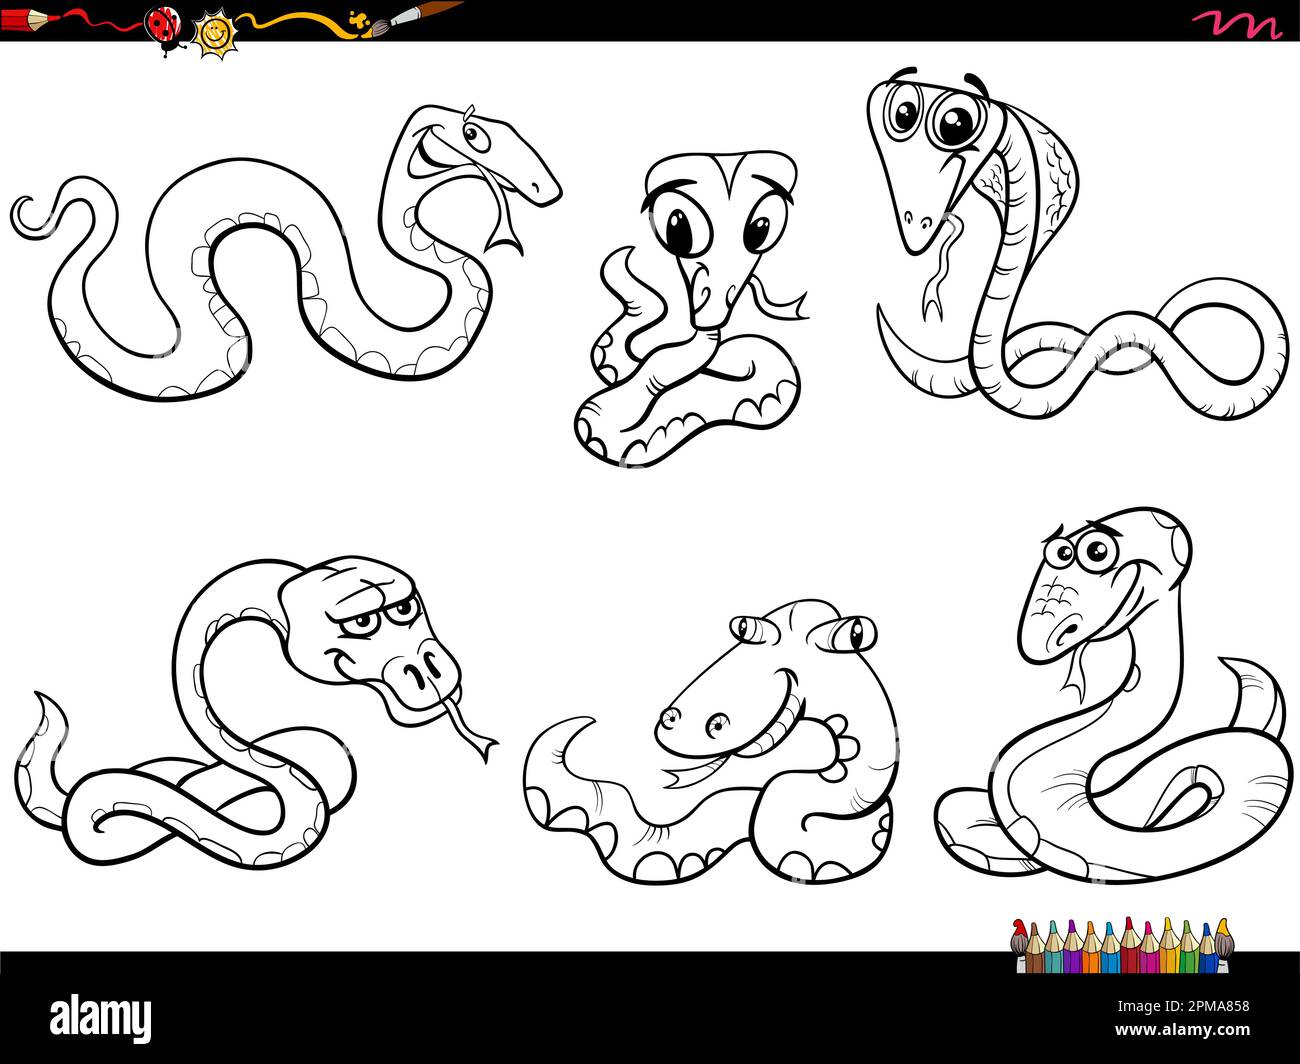 Black and white cartoon humorous illustration of snakes animal characters set coloring page Stock Vector